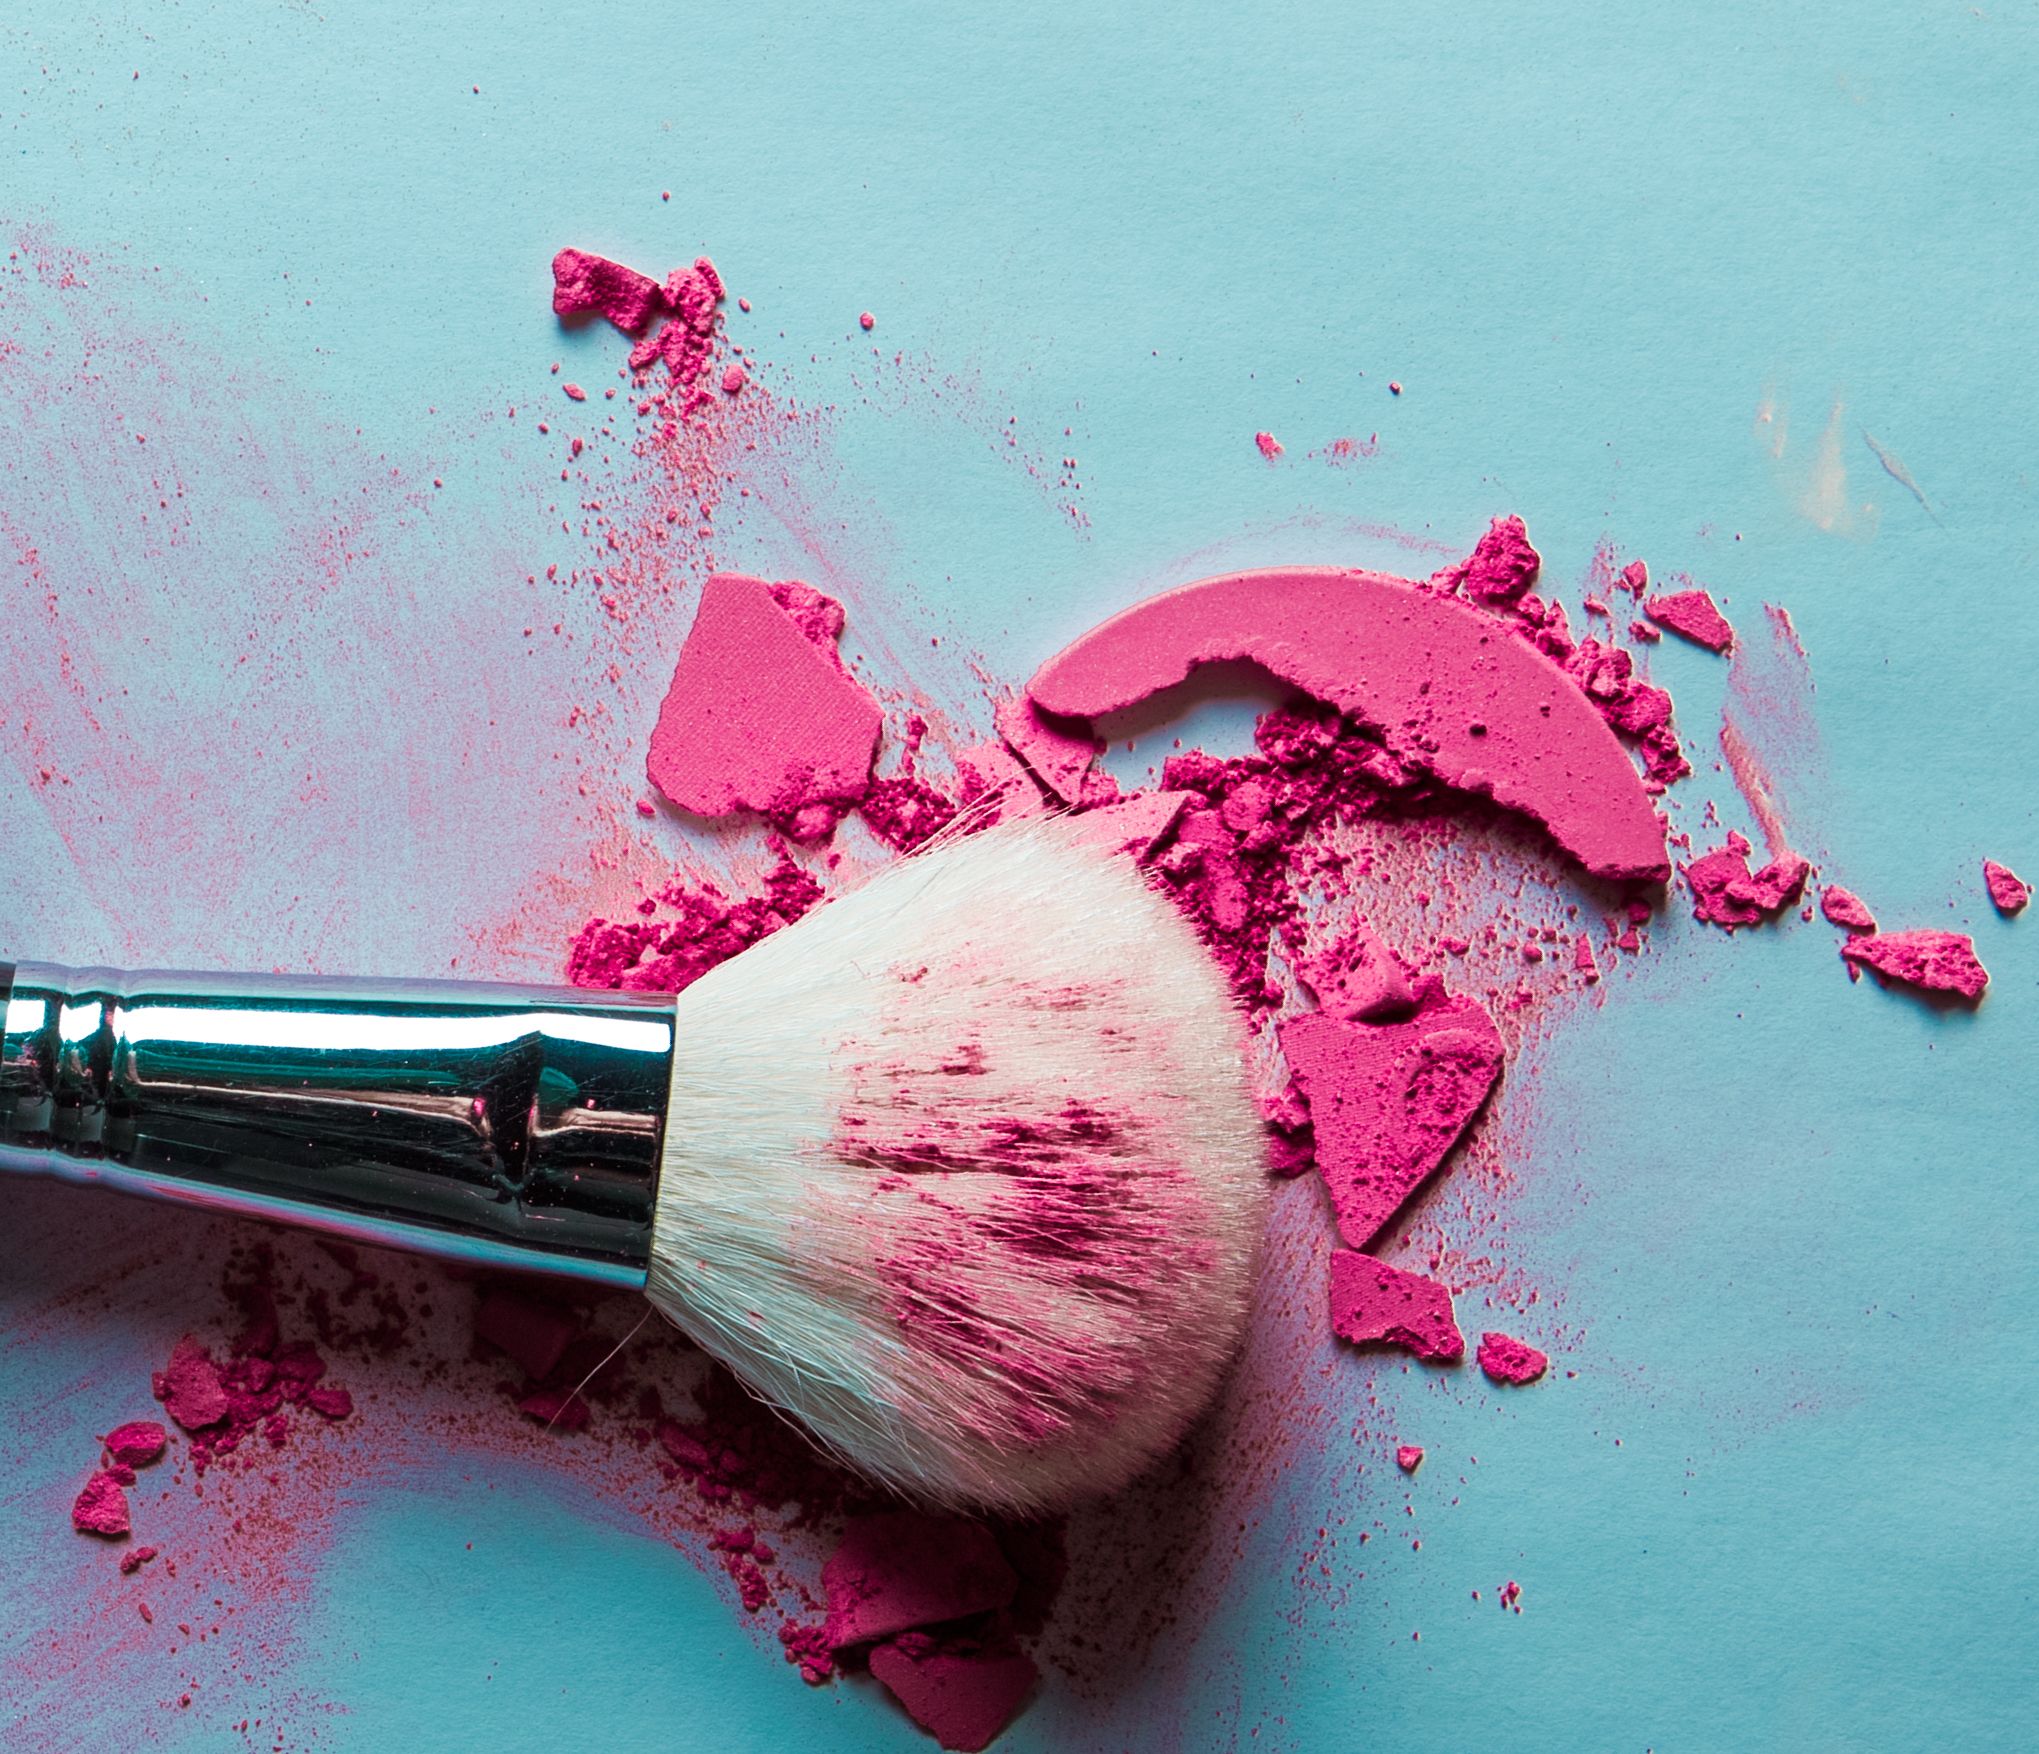 cleaning makeup brushes with shampoo